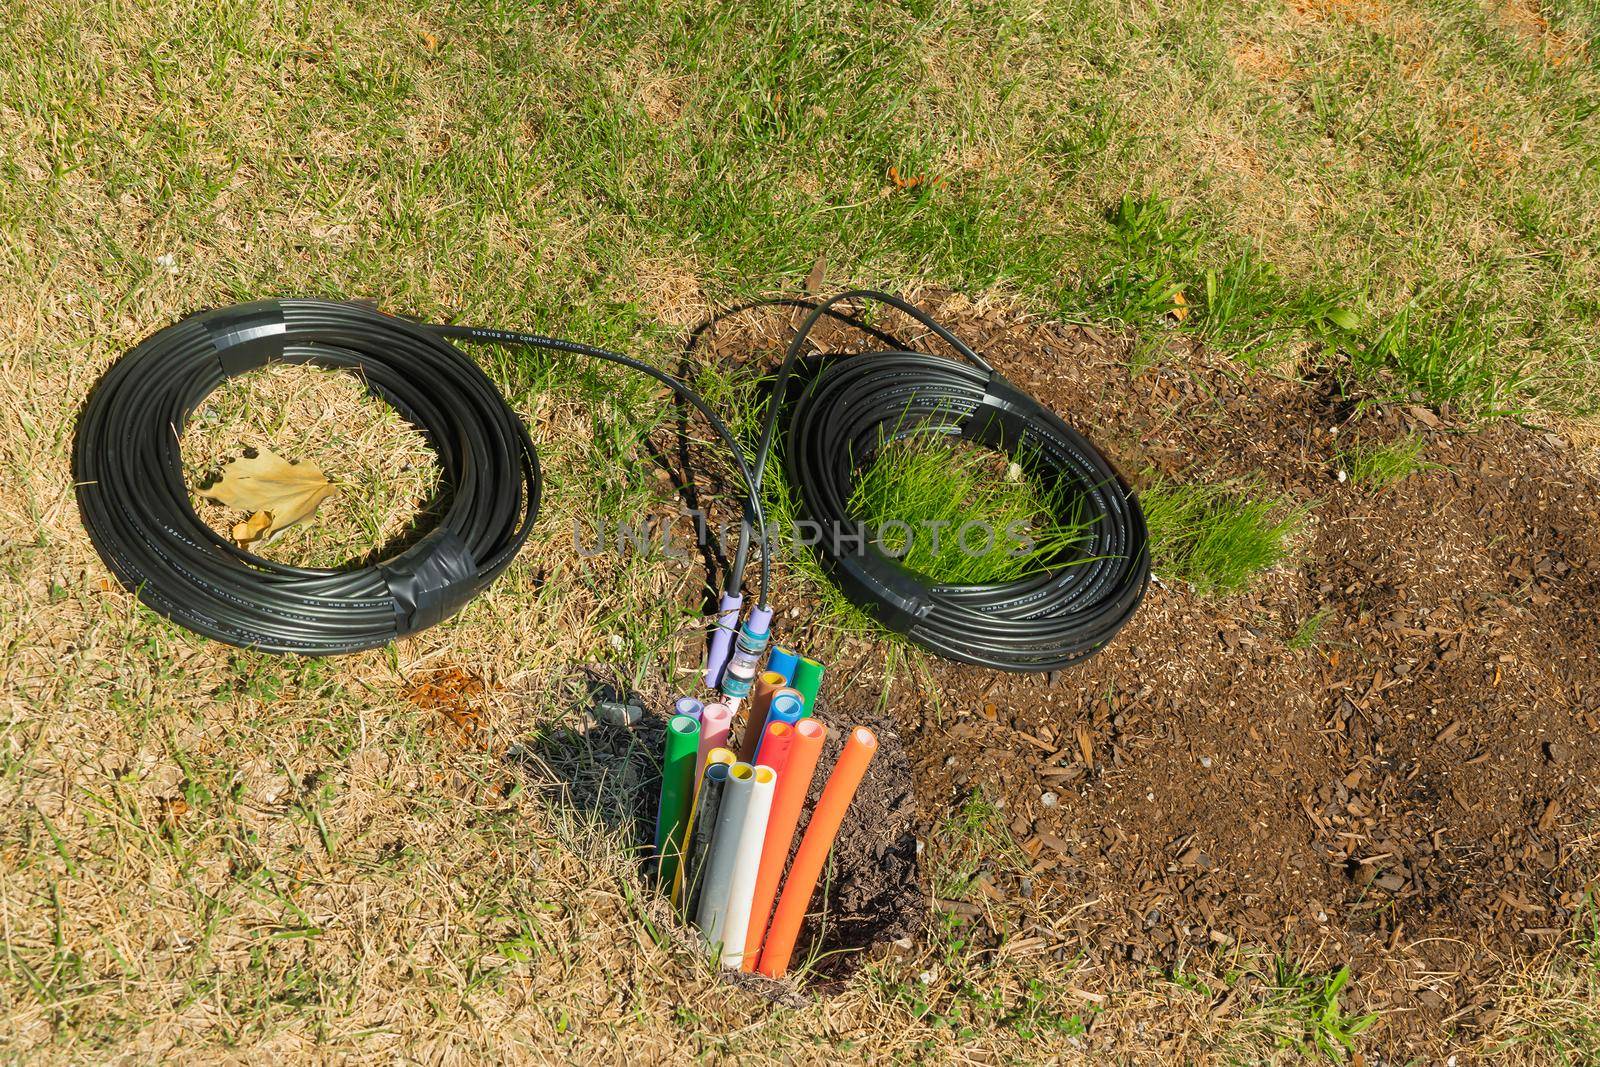 Cables with optical fiber for the Internet laid underground by ben44